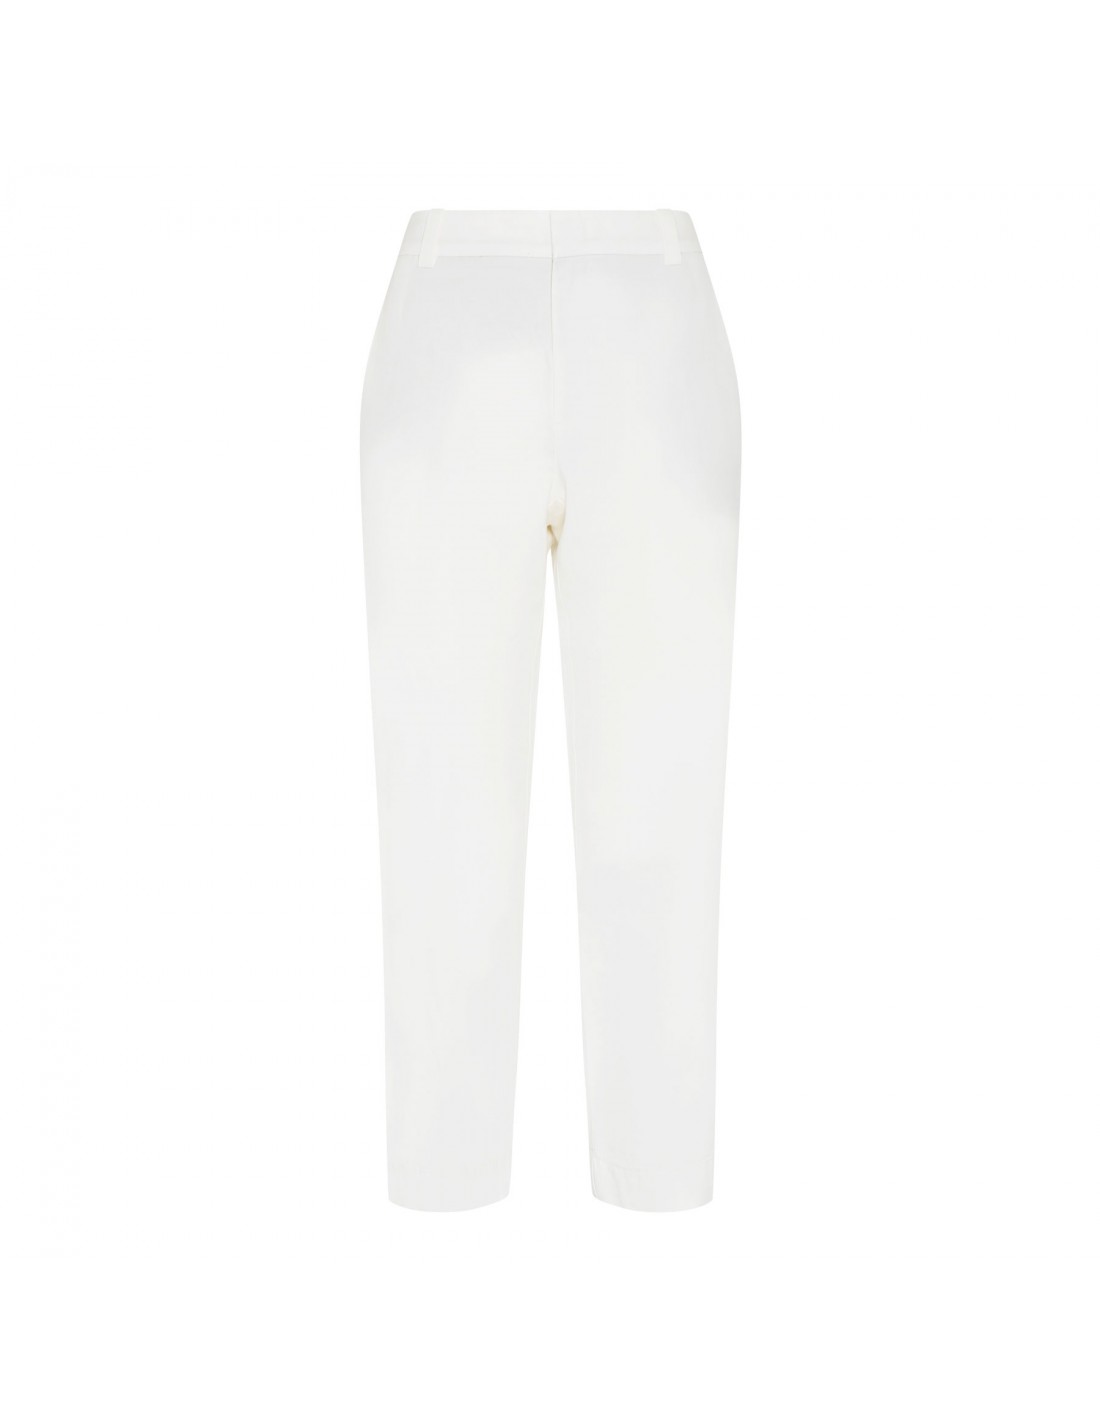 White washed cotton crop pants